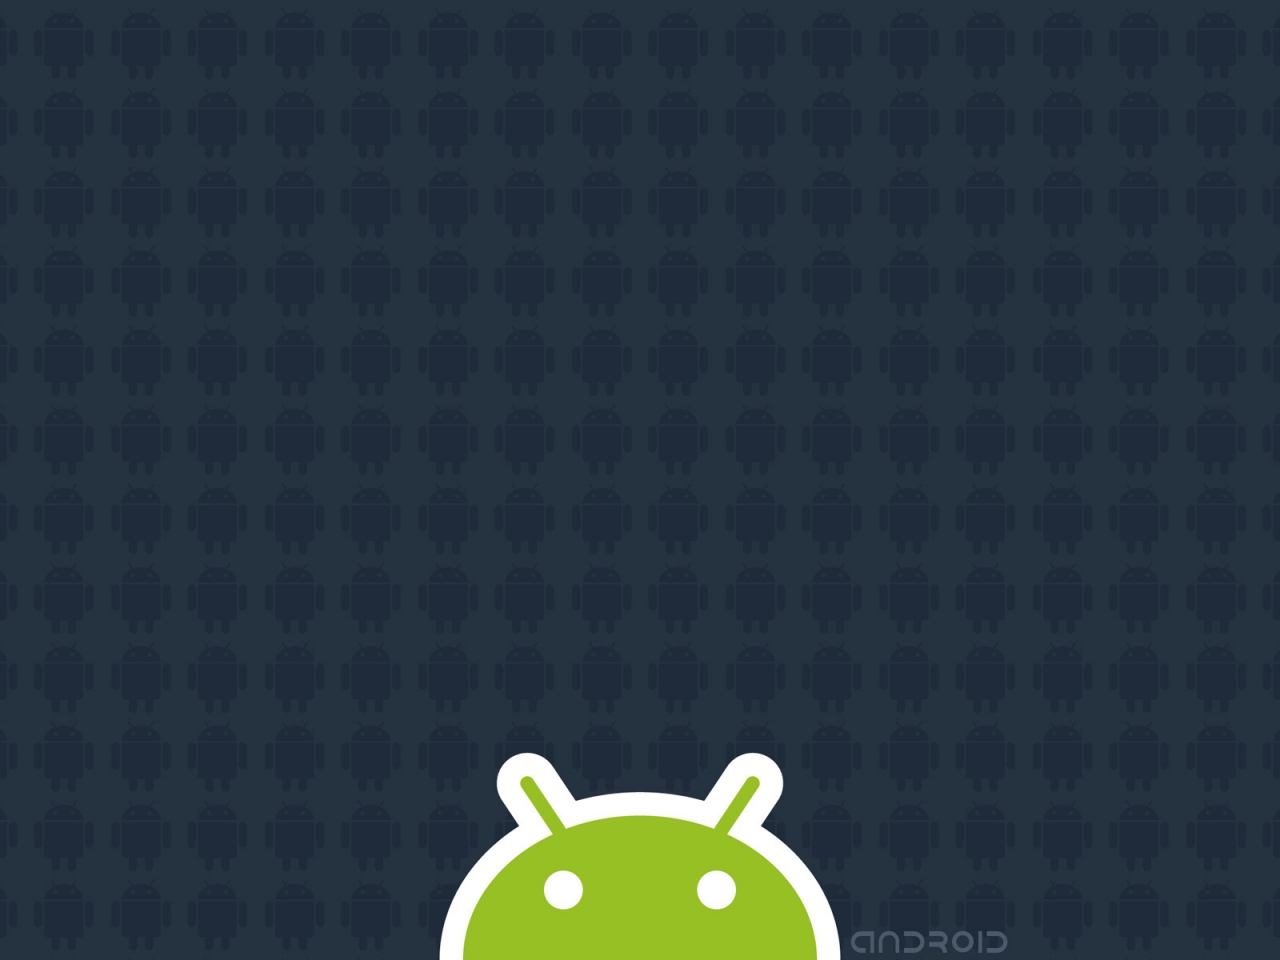 Android Pattern for 1280 x 960 resolution